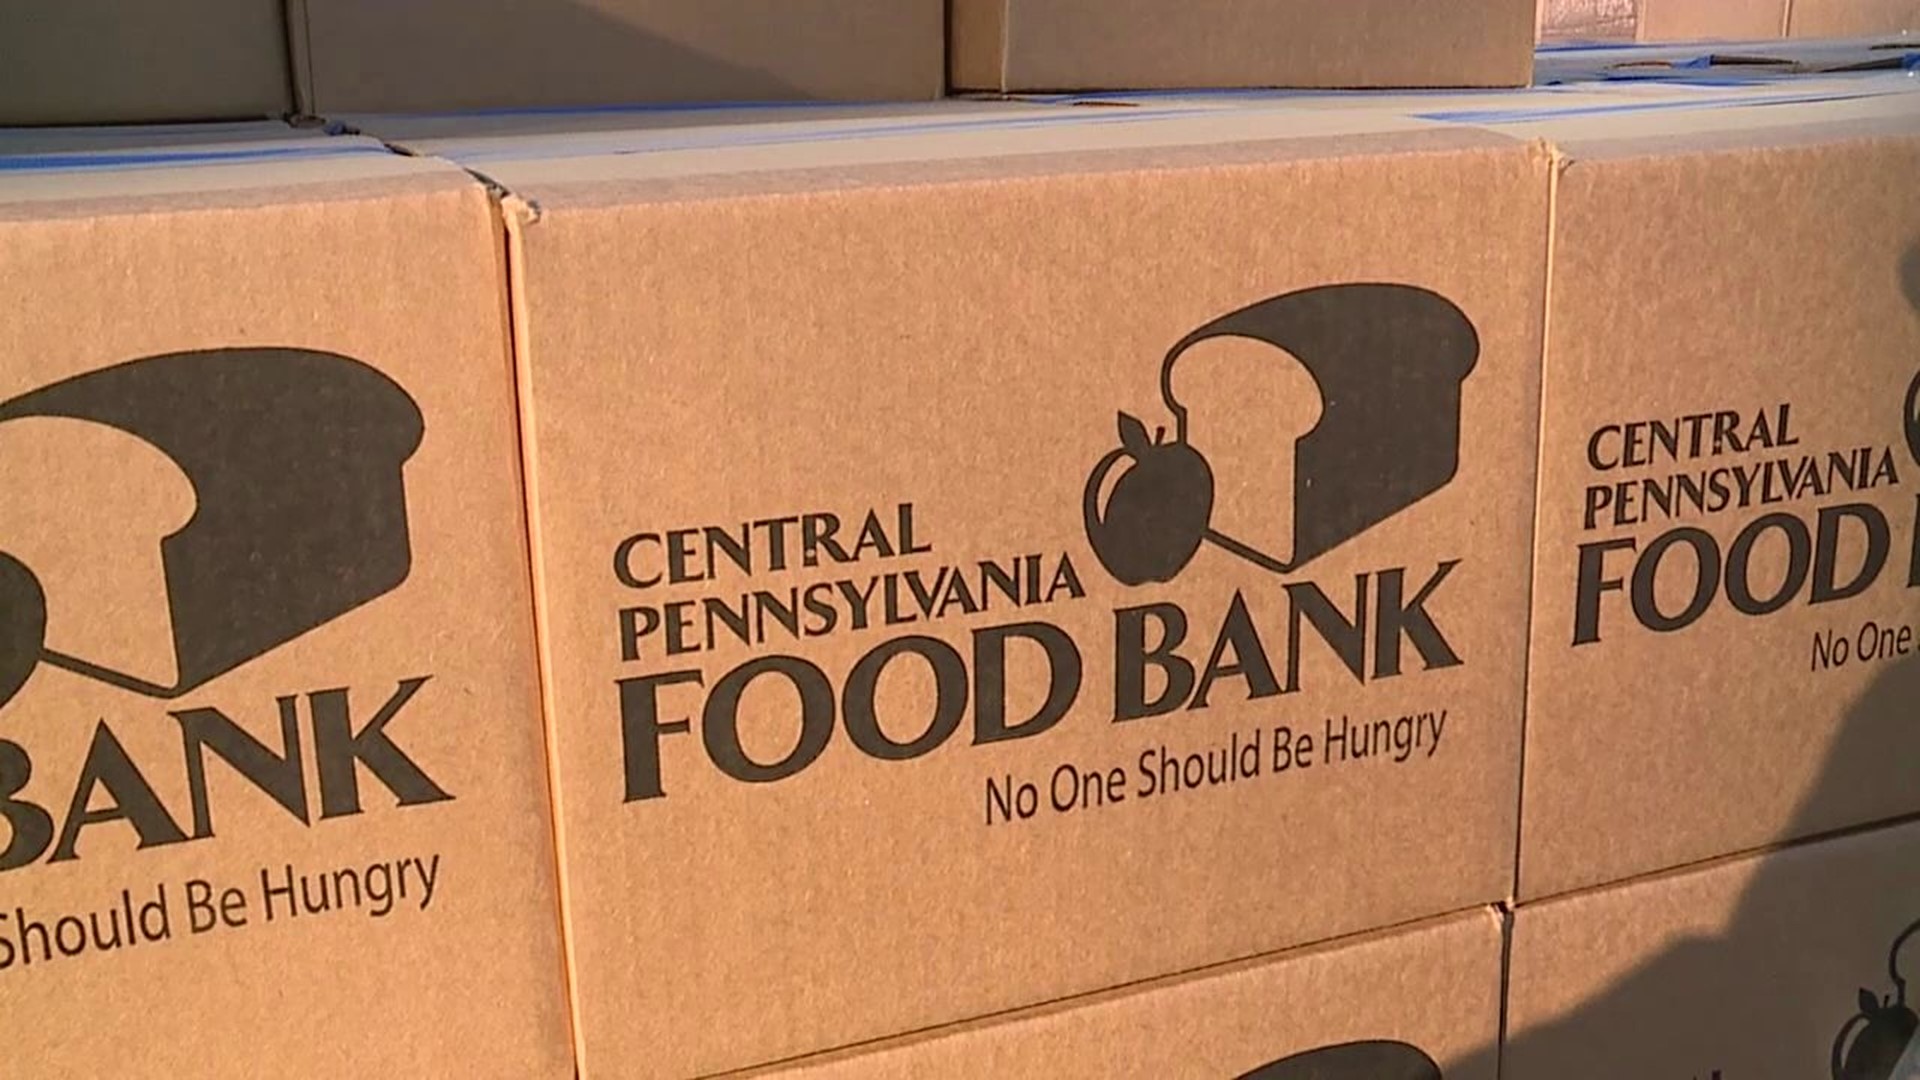 The demand for food is at a record high. Newswatch 16's Chris Keating shows us what the Central Pennsylvania Food Bank is doing to meet the demand.